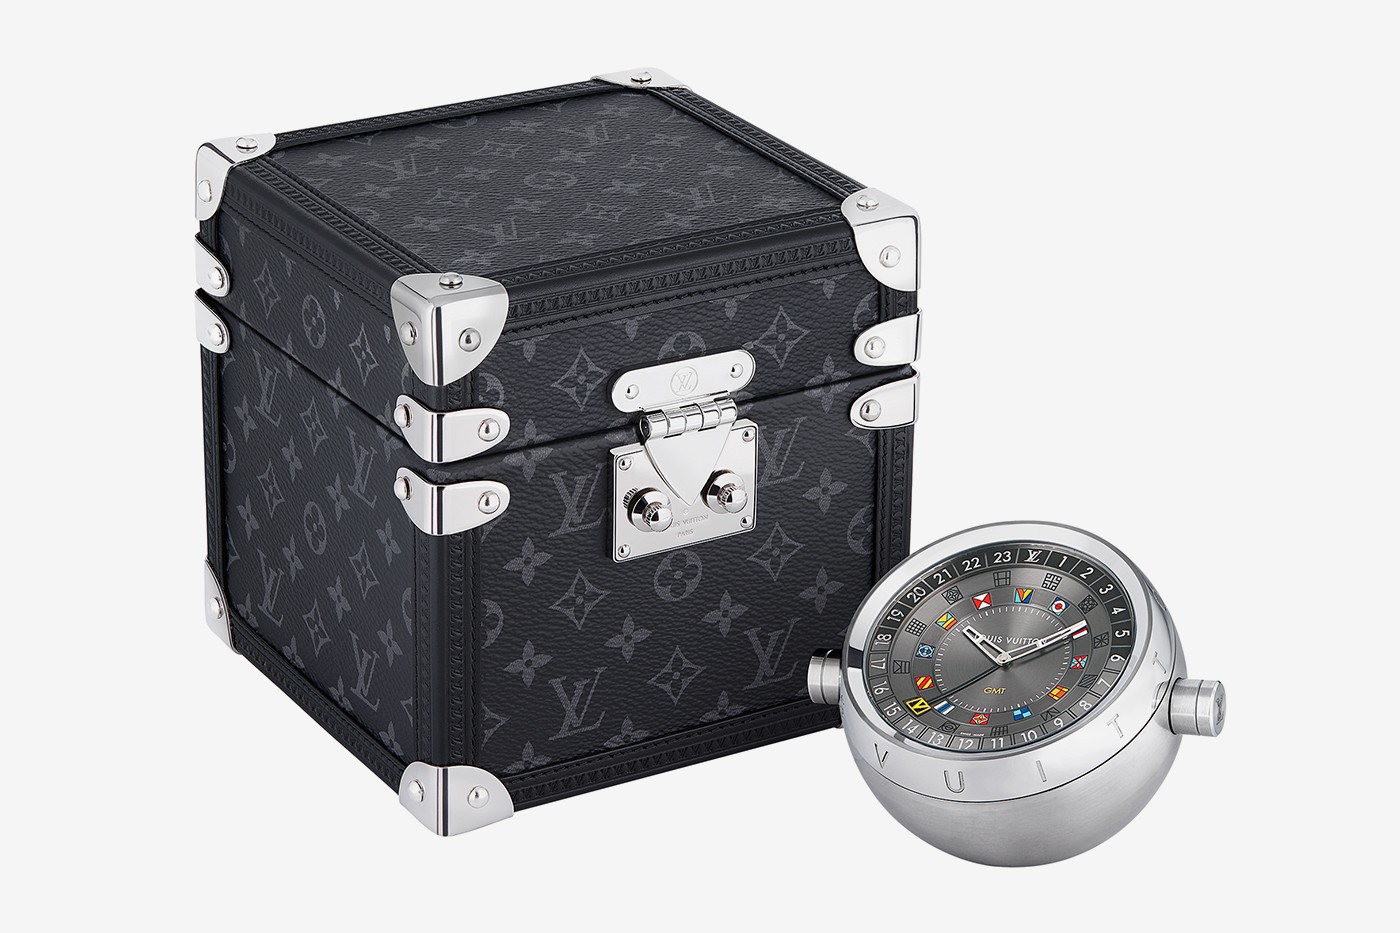 Louis Vuitton's Travel Clock comes with its own Trunk case